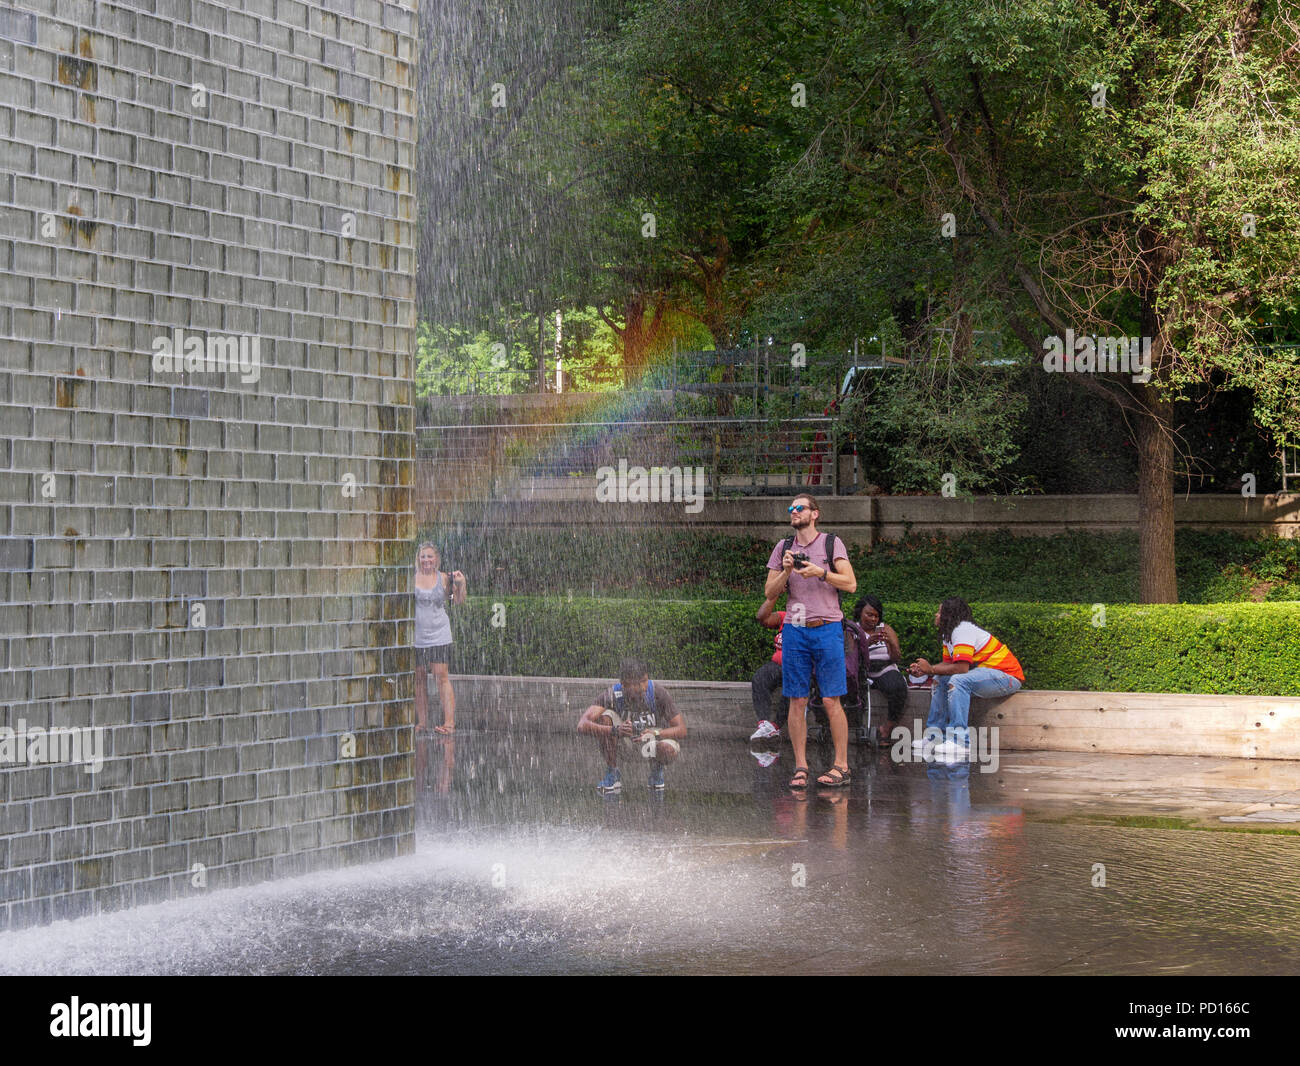 Crown Fountain in Chicago's Millennium Park generates its own rainbow. Stock Photo